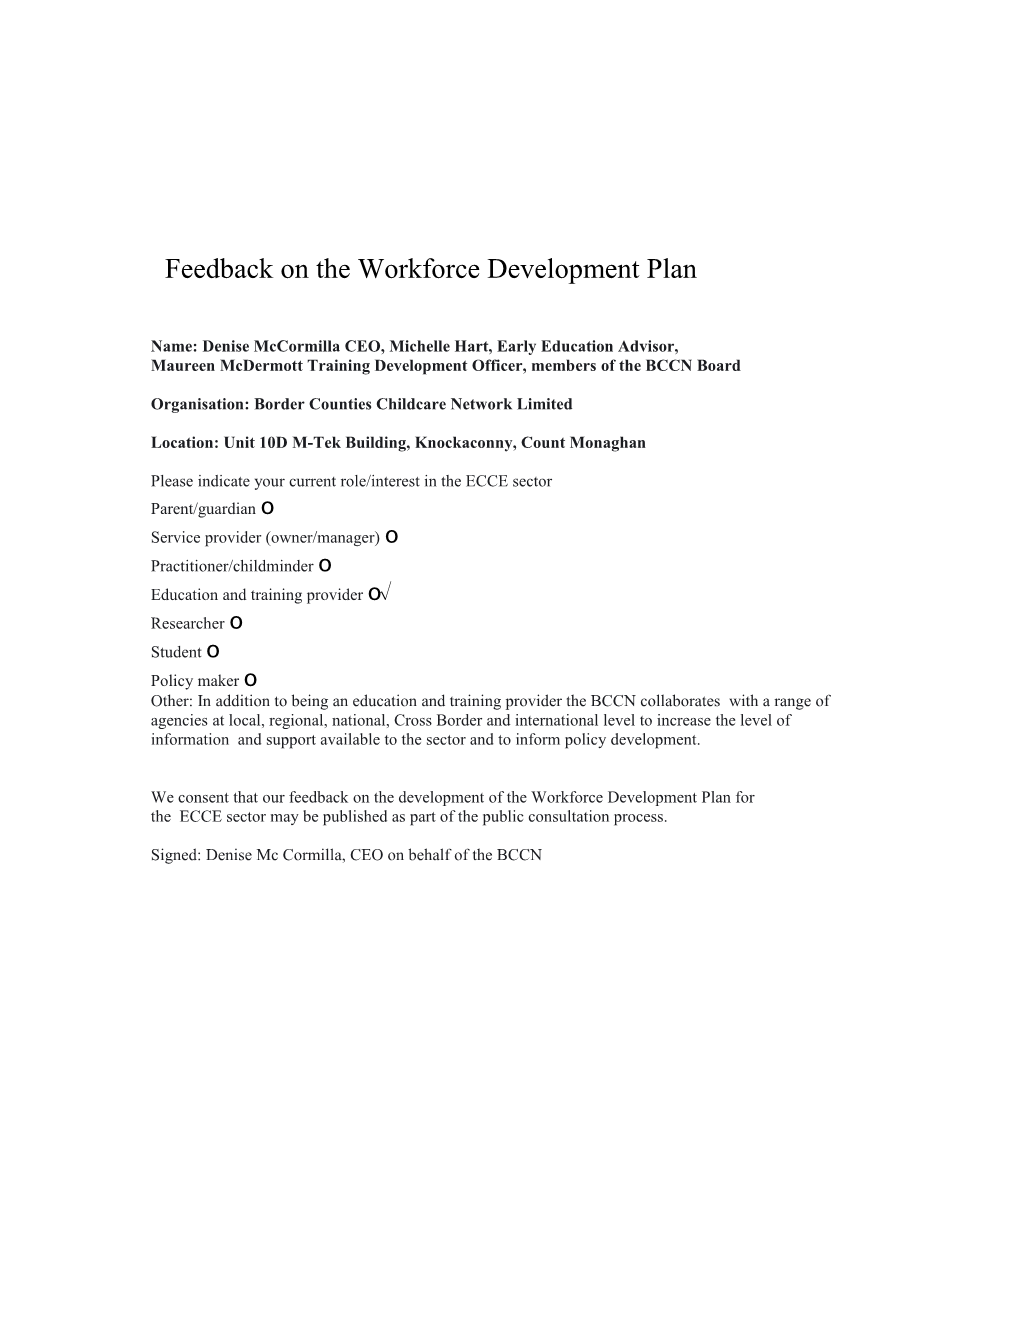 Feedback from the Border Counties Childcare Network on the Workforce Development Plan